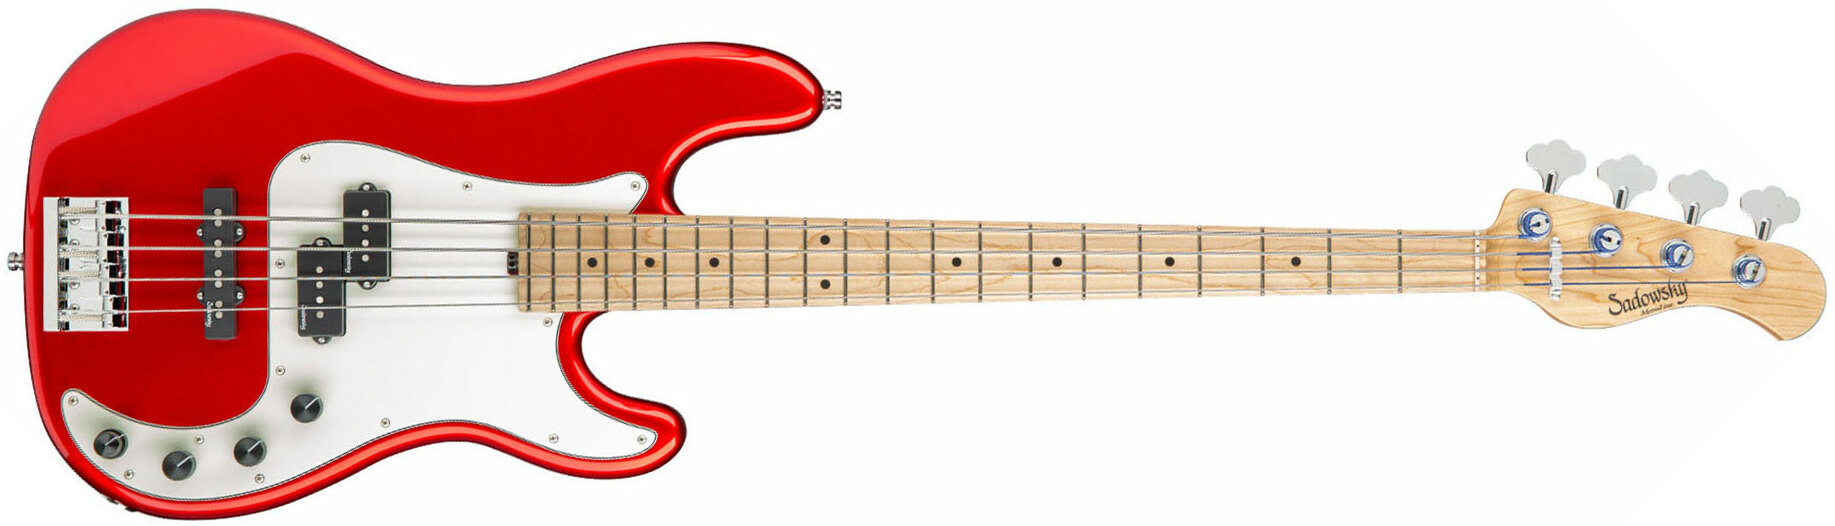 Sadowsky Hybrid P/j Bass 21 Fret Ash 4c Metroline All Active Mn - Solid Candy Apple Red - Basse Électrique Solid Body - Main picture